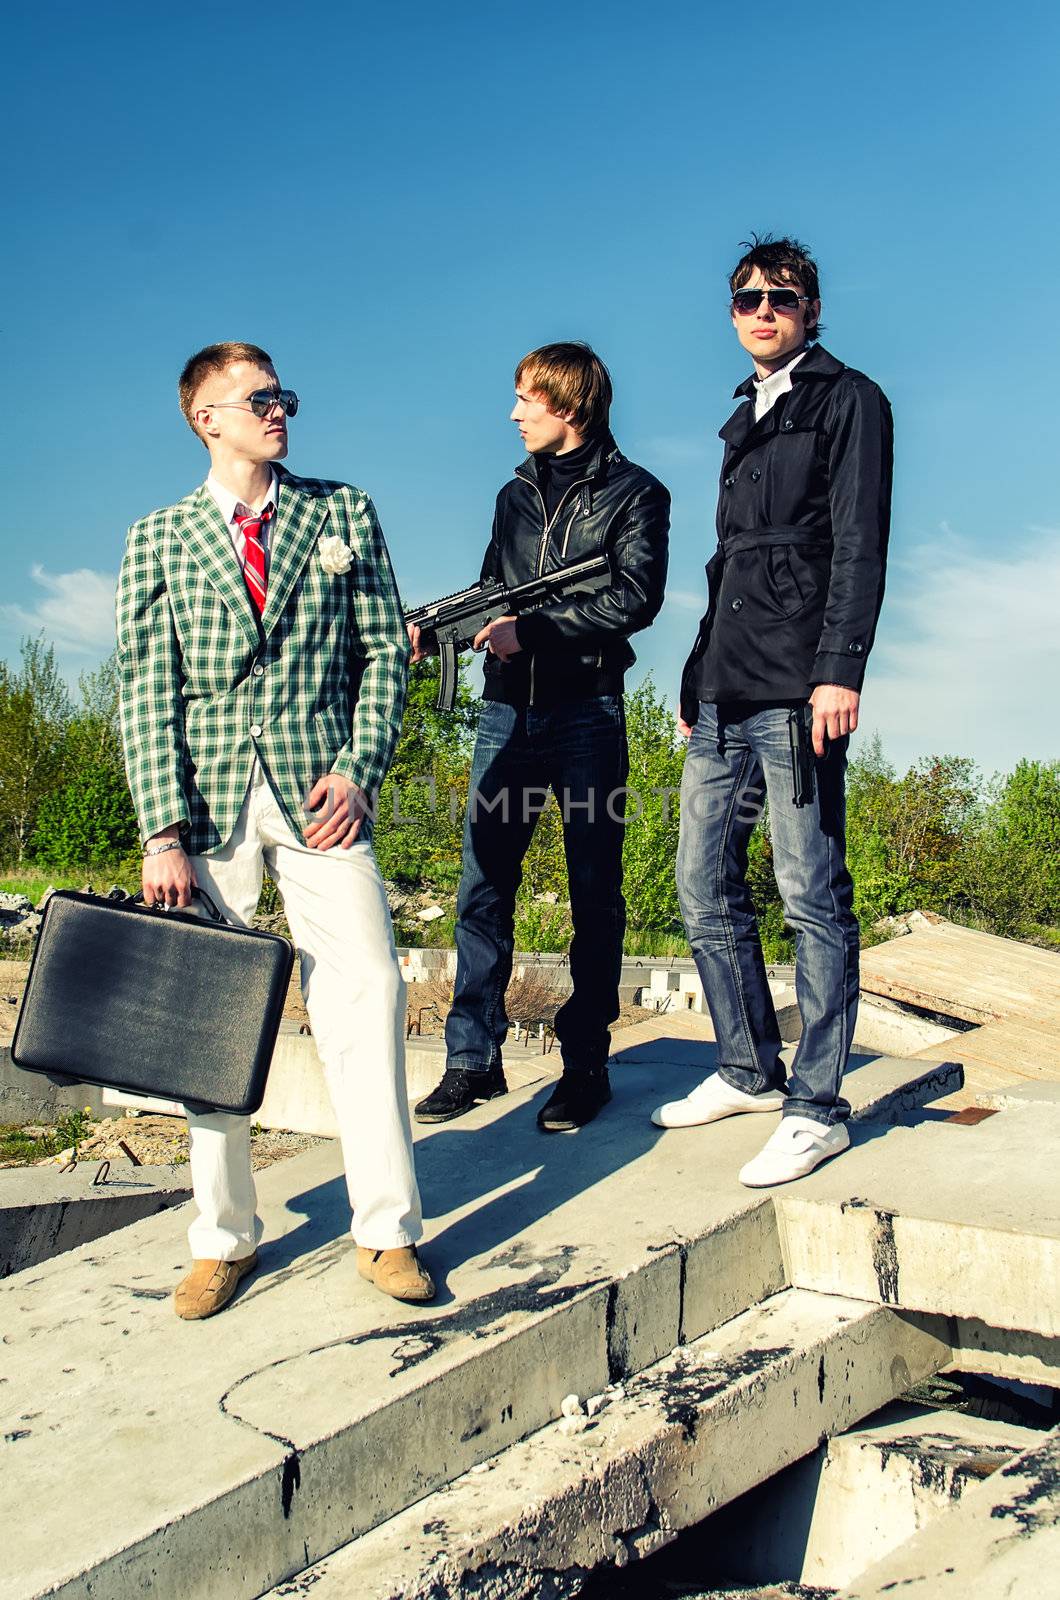 Mafia: Three thugs with a suitcase and weapons by dmitrimaruta